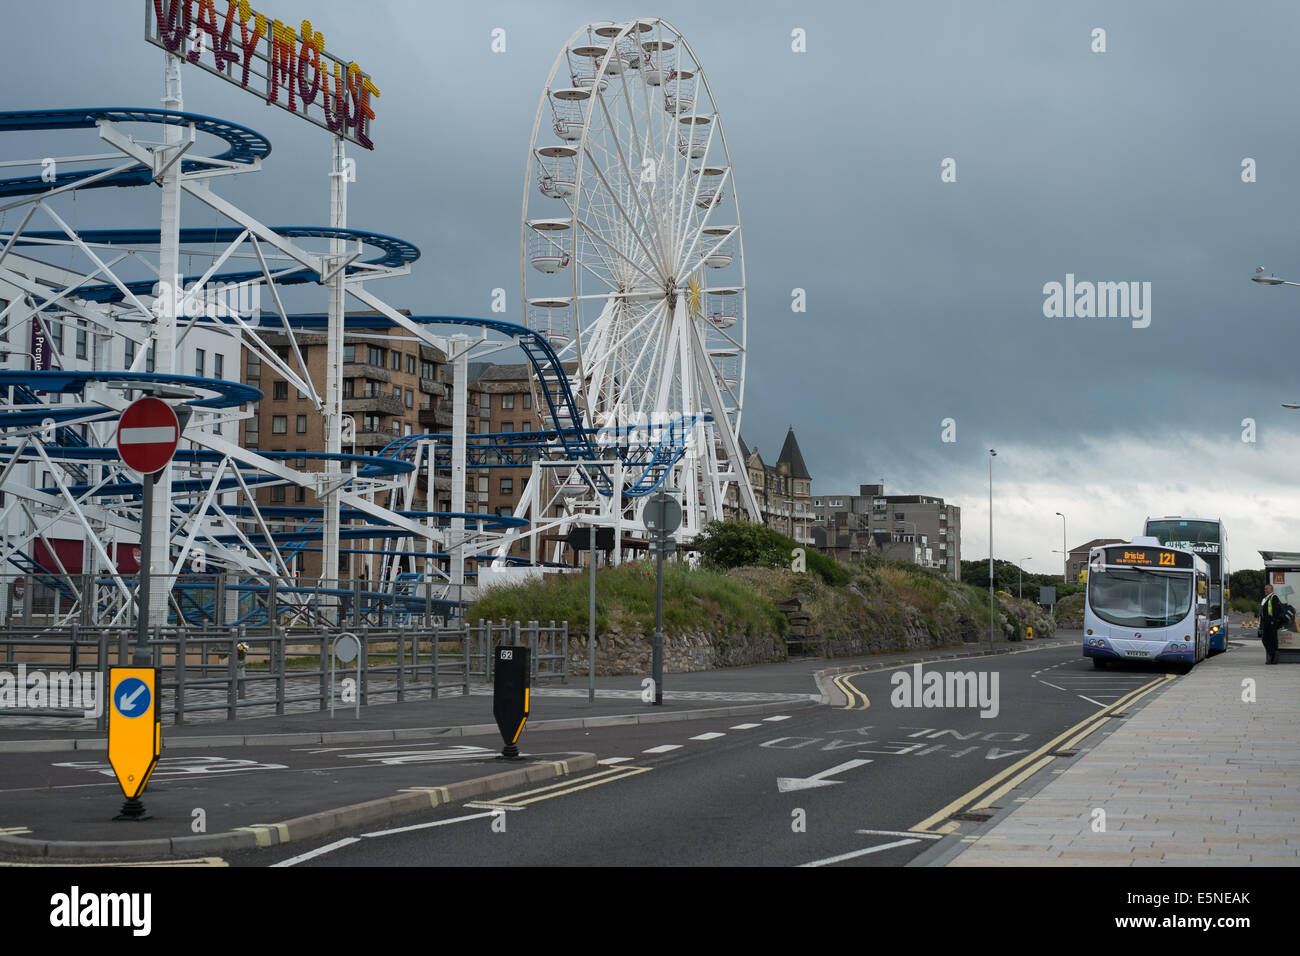 Bus  and wheel , seafront, Weston-super-Mare Stock Photo